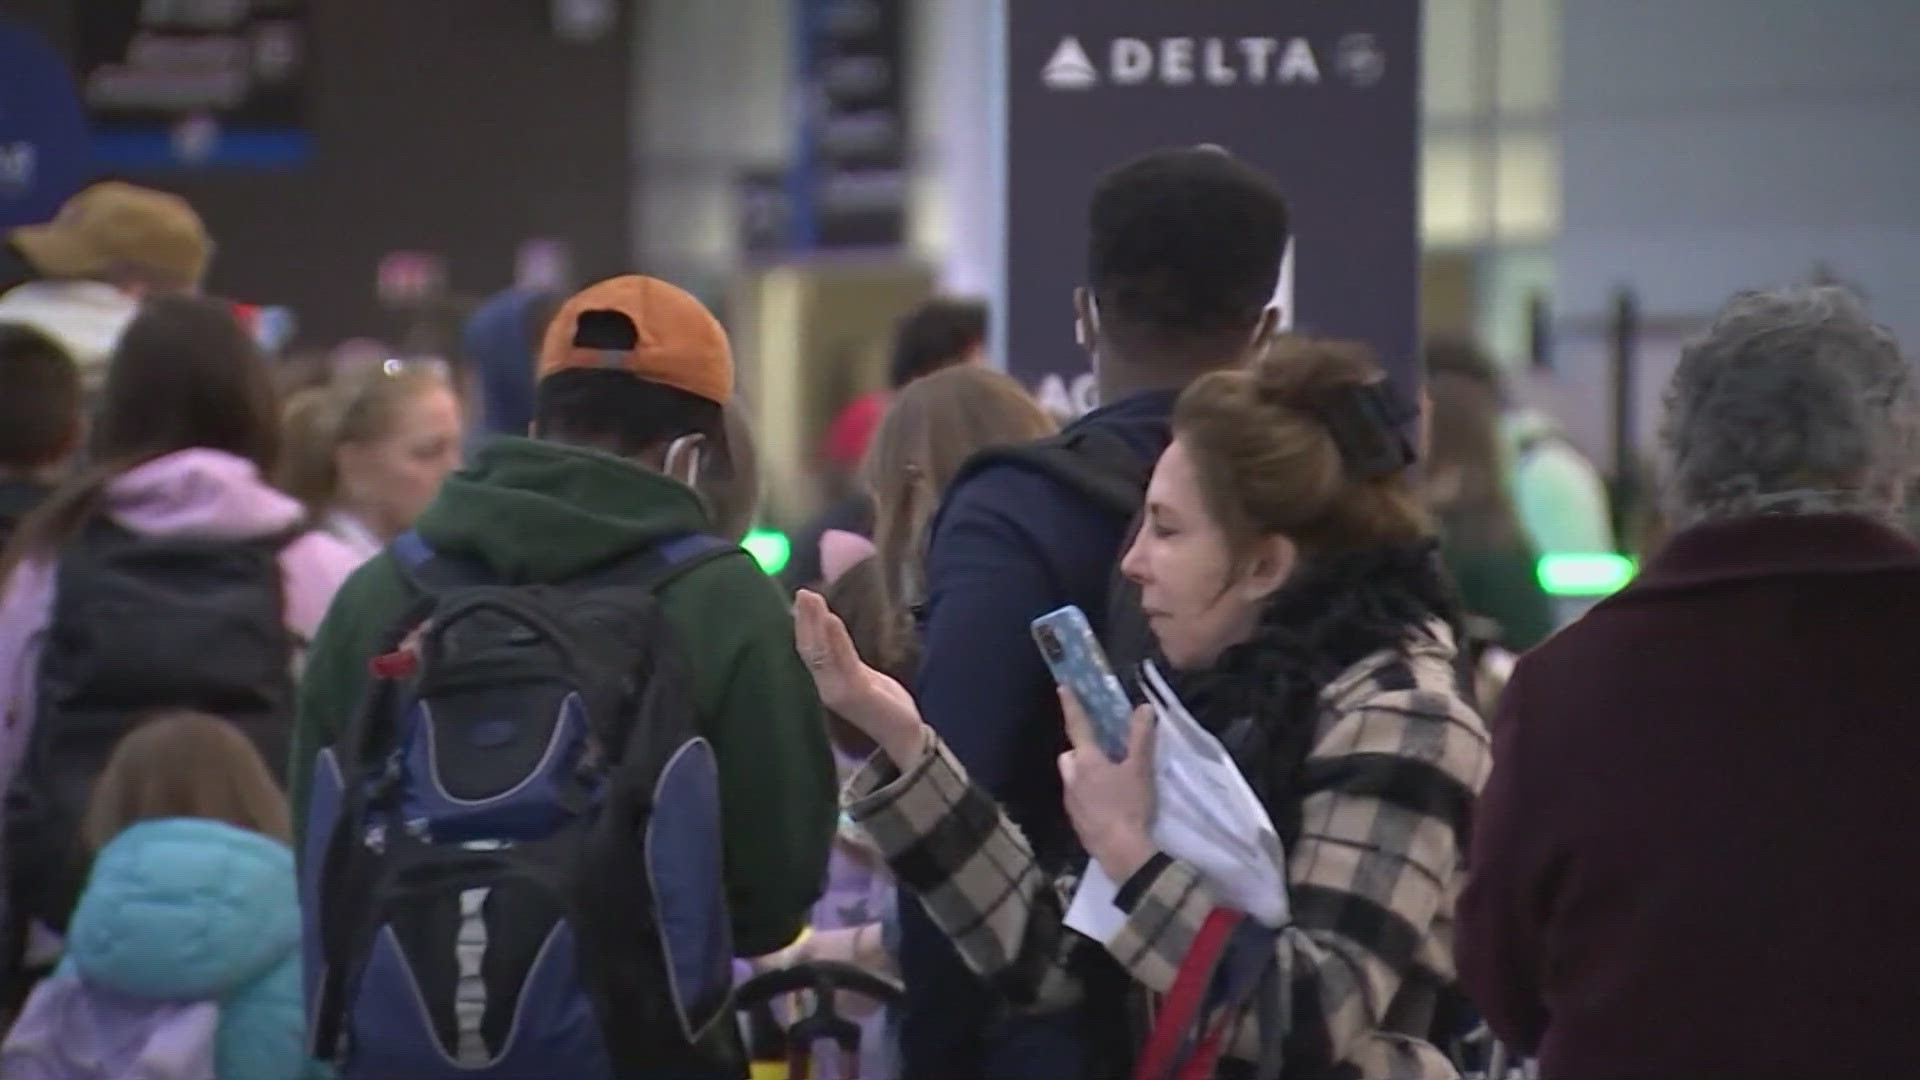 The busiest holiday travel season in years is off to a smooth start with few delays at the airport. Austin Love has everything you need to know before traveling.